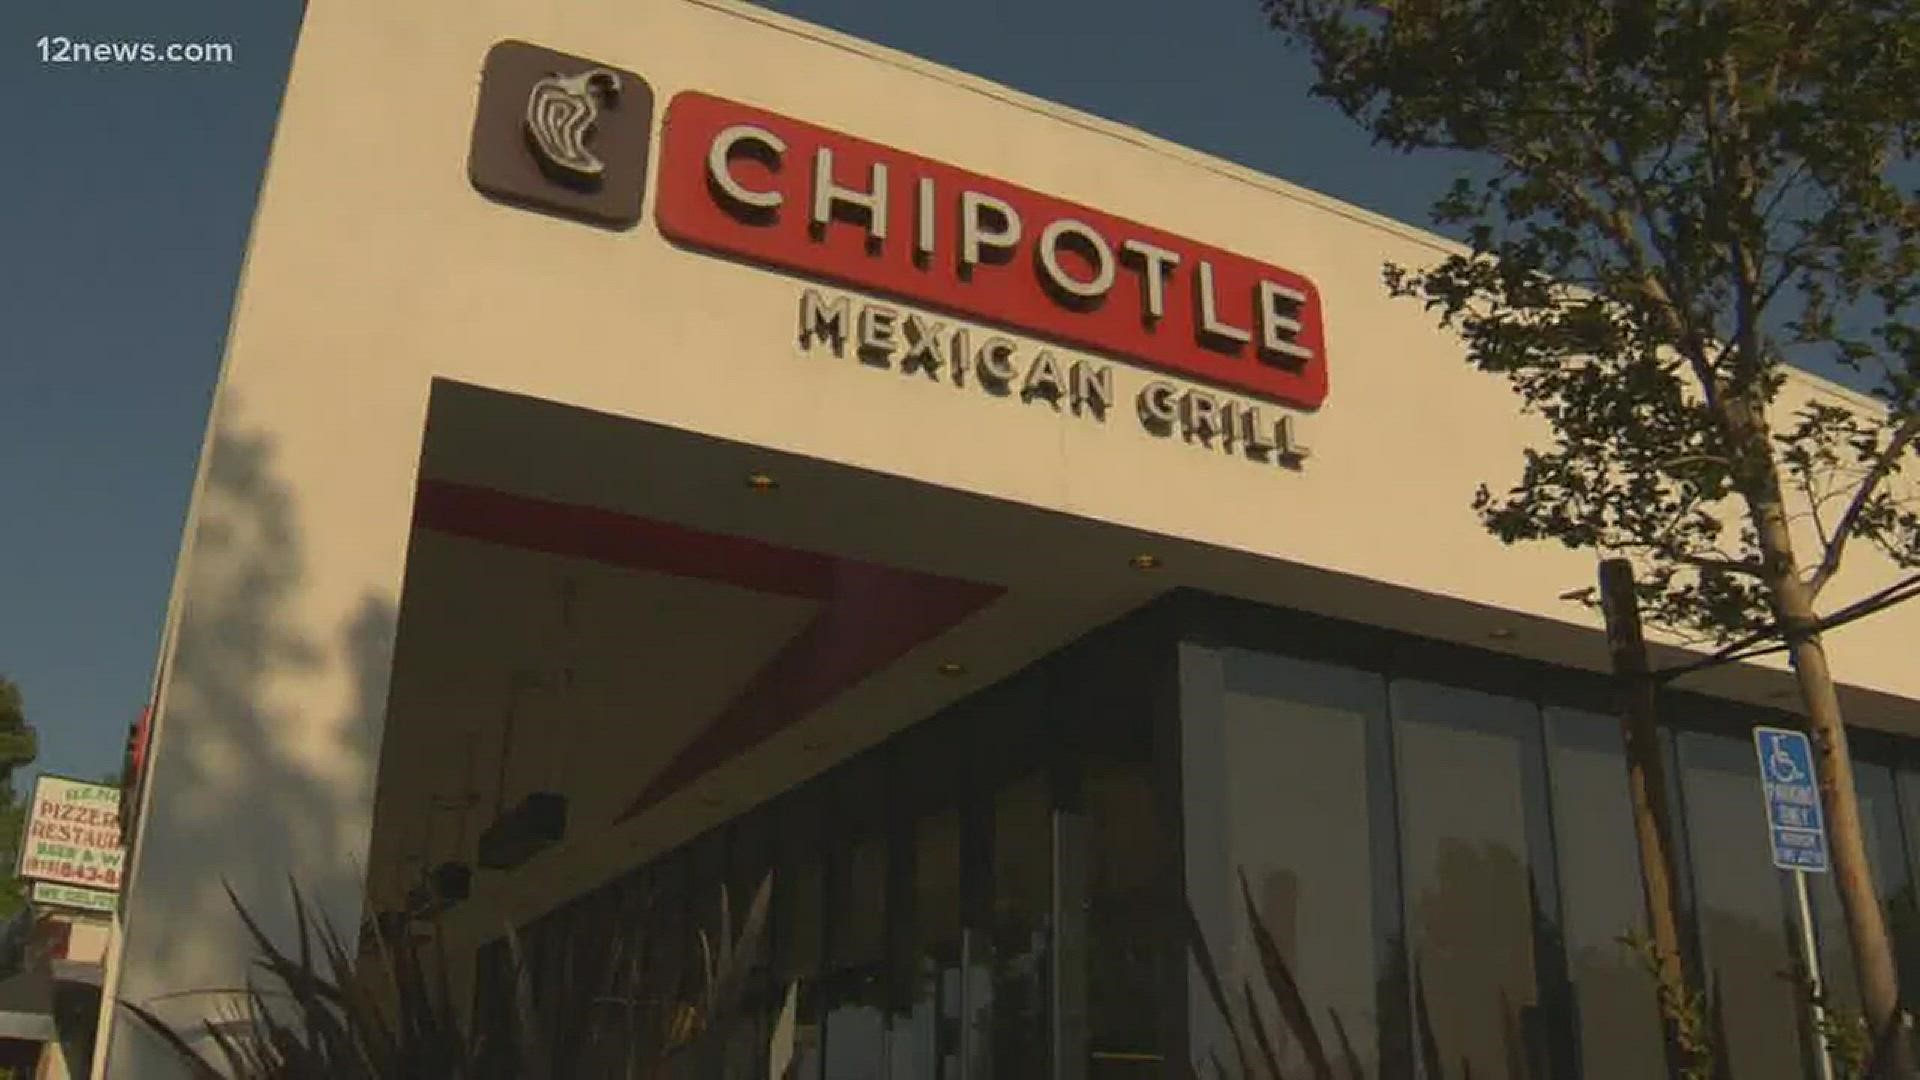 Chipotle names new CEO who's known for innovative marketing at Taco Bell.